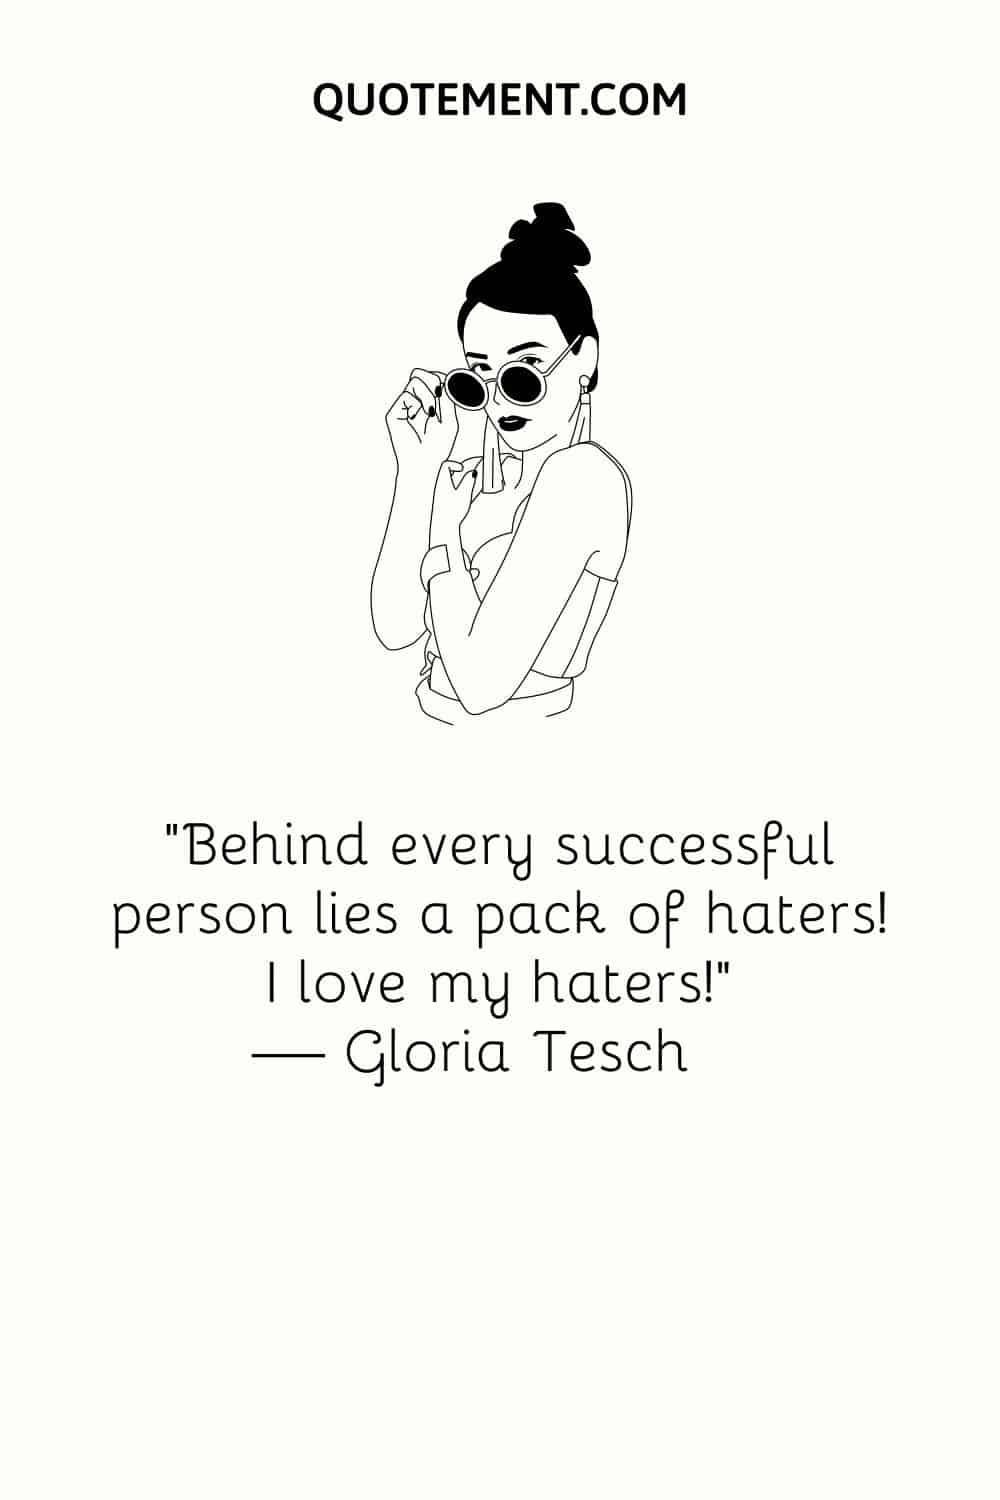 “Behind every successful person lies a pack of haters! I love my haters!” — Gloria Tesch